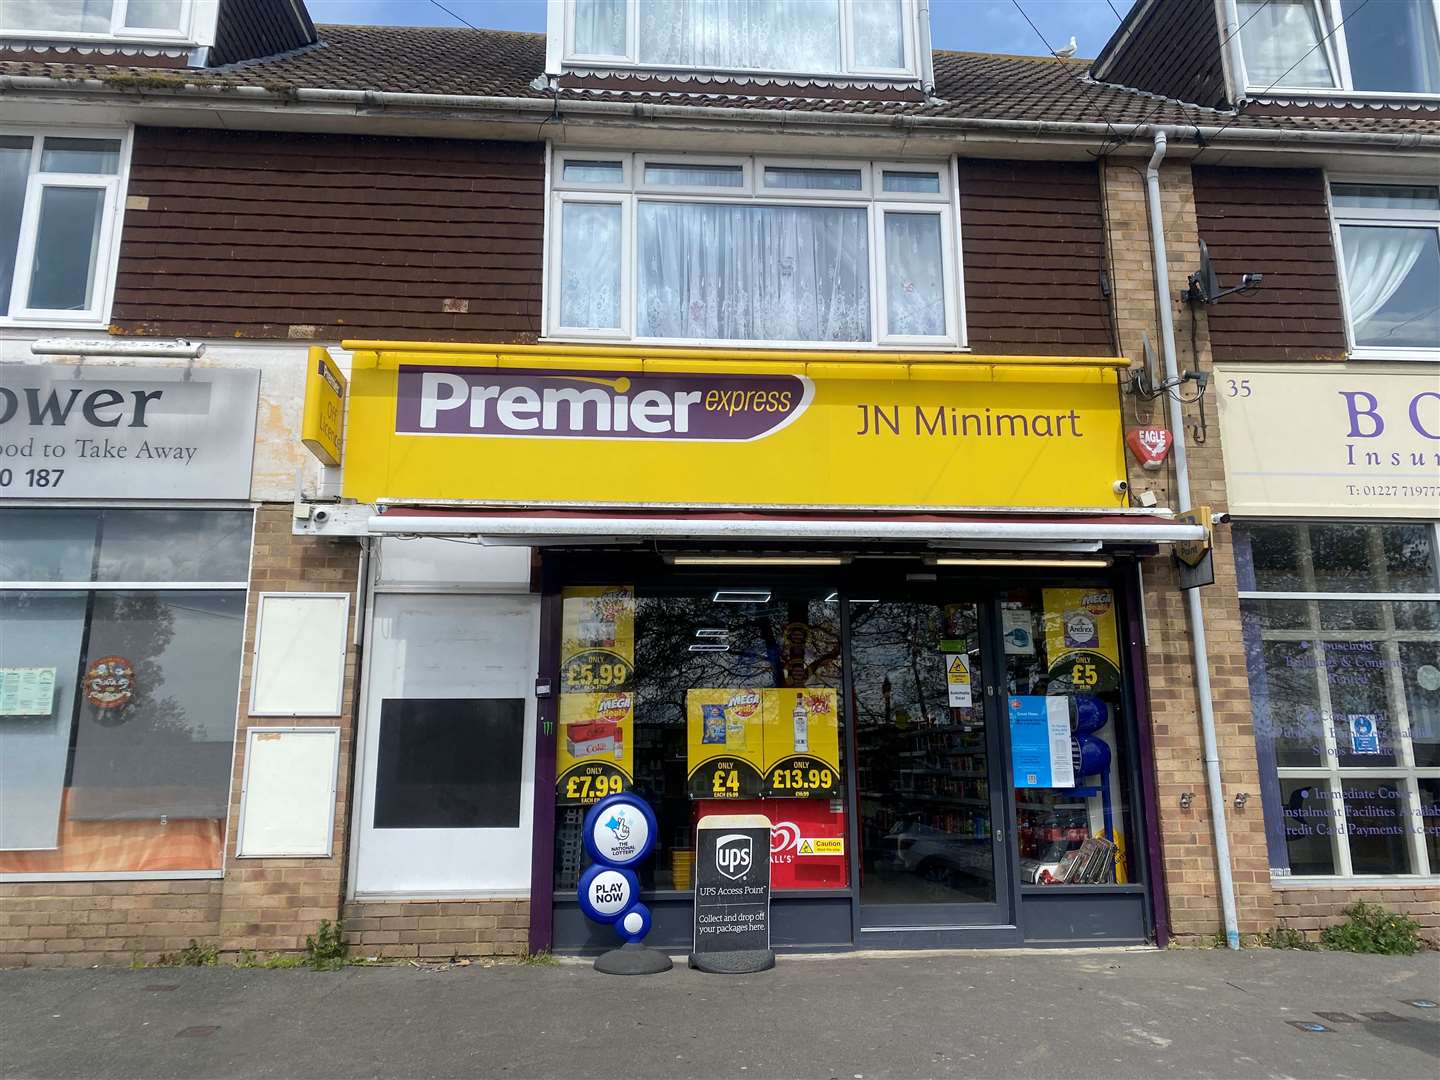 The Premier Minimart in Sturry will host the new Post Office